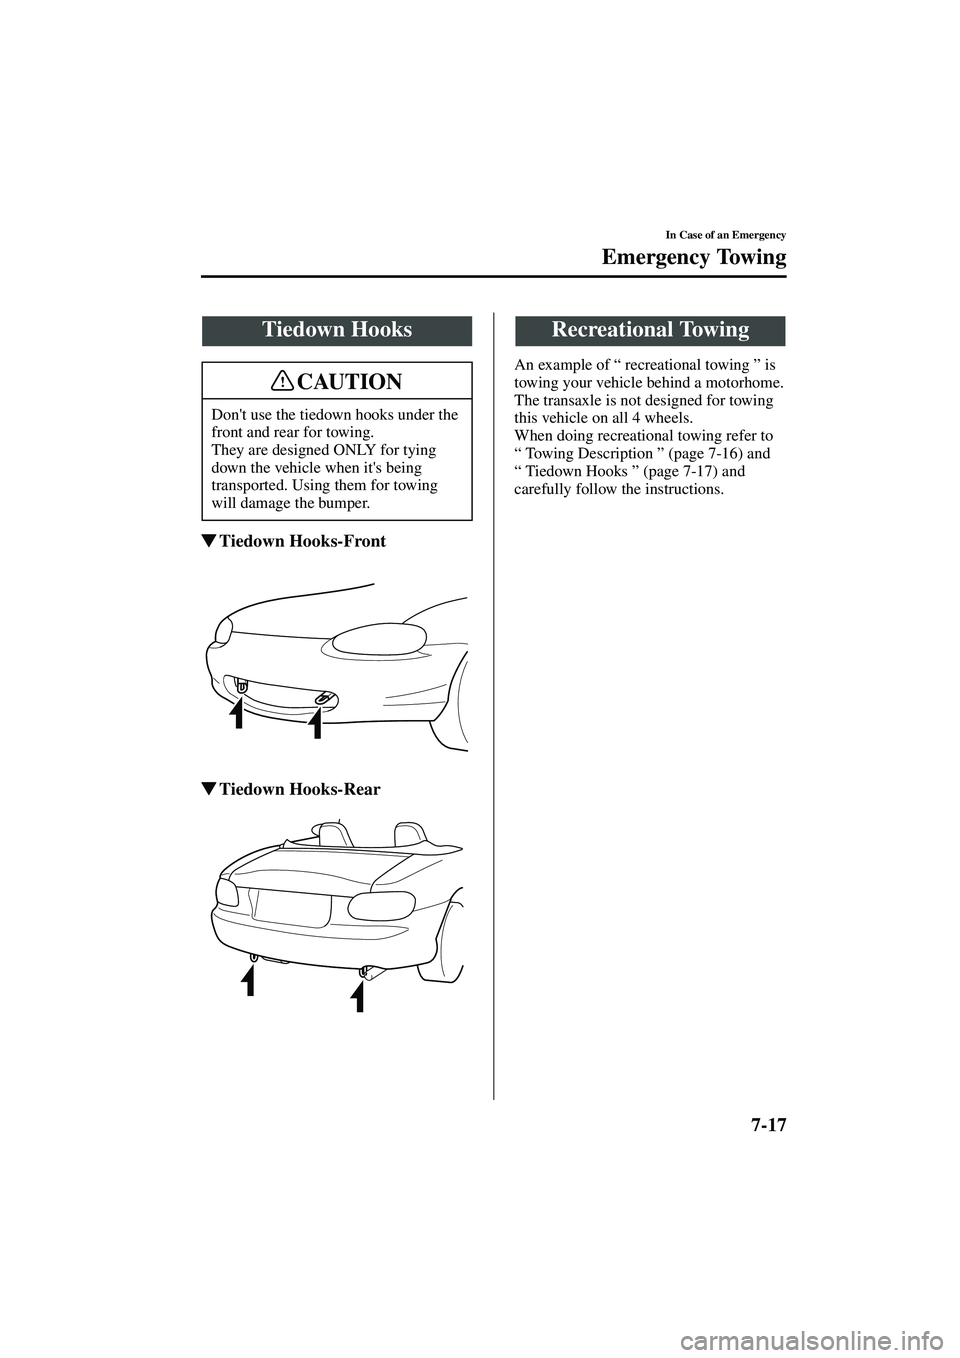 MAZDA MODEL MX-5 MIATA 2003 Owners Manual 7-17
In Case of an Emergency
Emergency Towing
Form No. 8R09-EA-02G
Tiedown Hooks-Front
 Tiedown Hooks-Rear
An example of 
“ recreational towing ”  is 
towing your vehicle behind a motorhome.
The